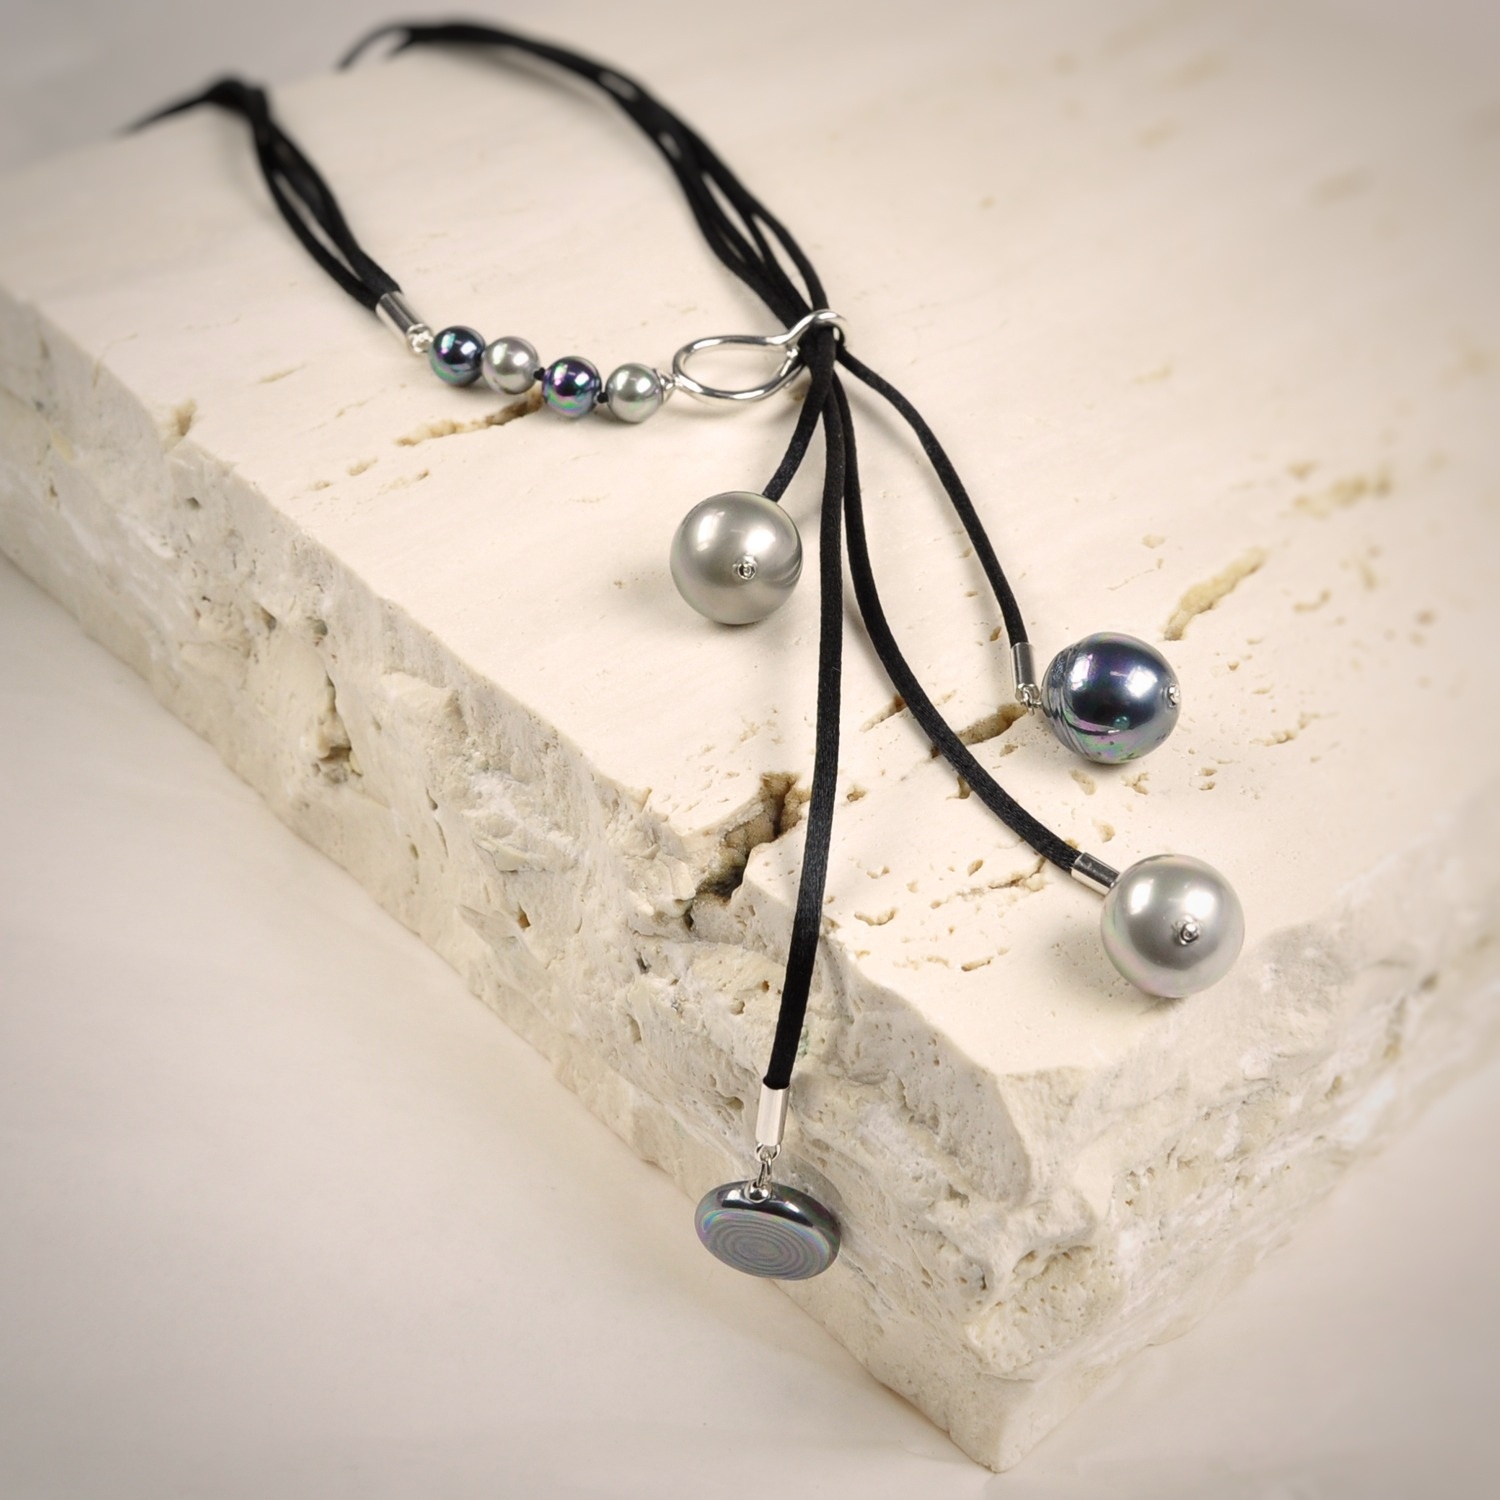 Cord Necklace with Black and Grey Pearls 2